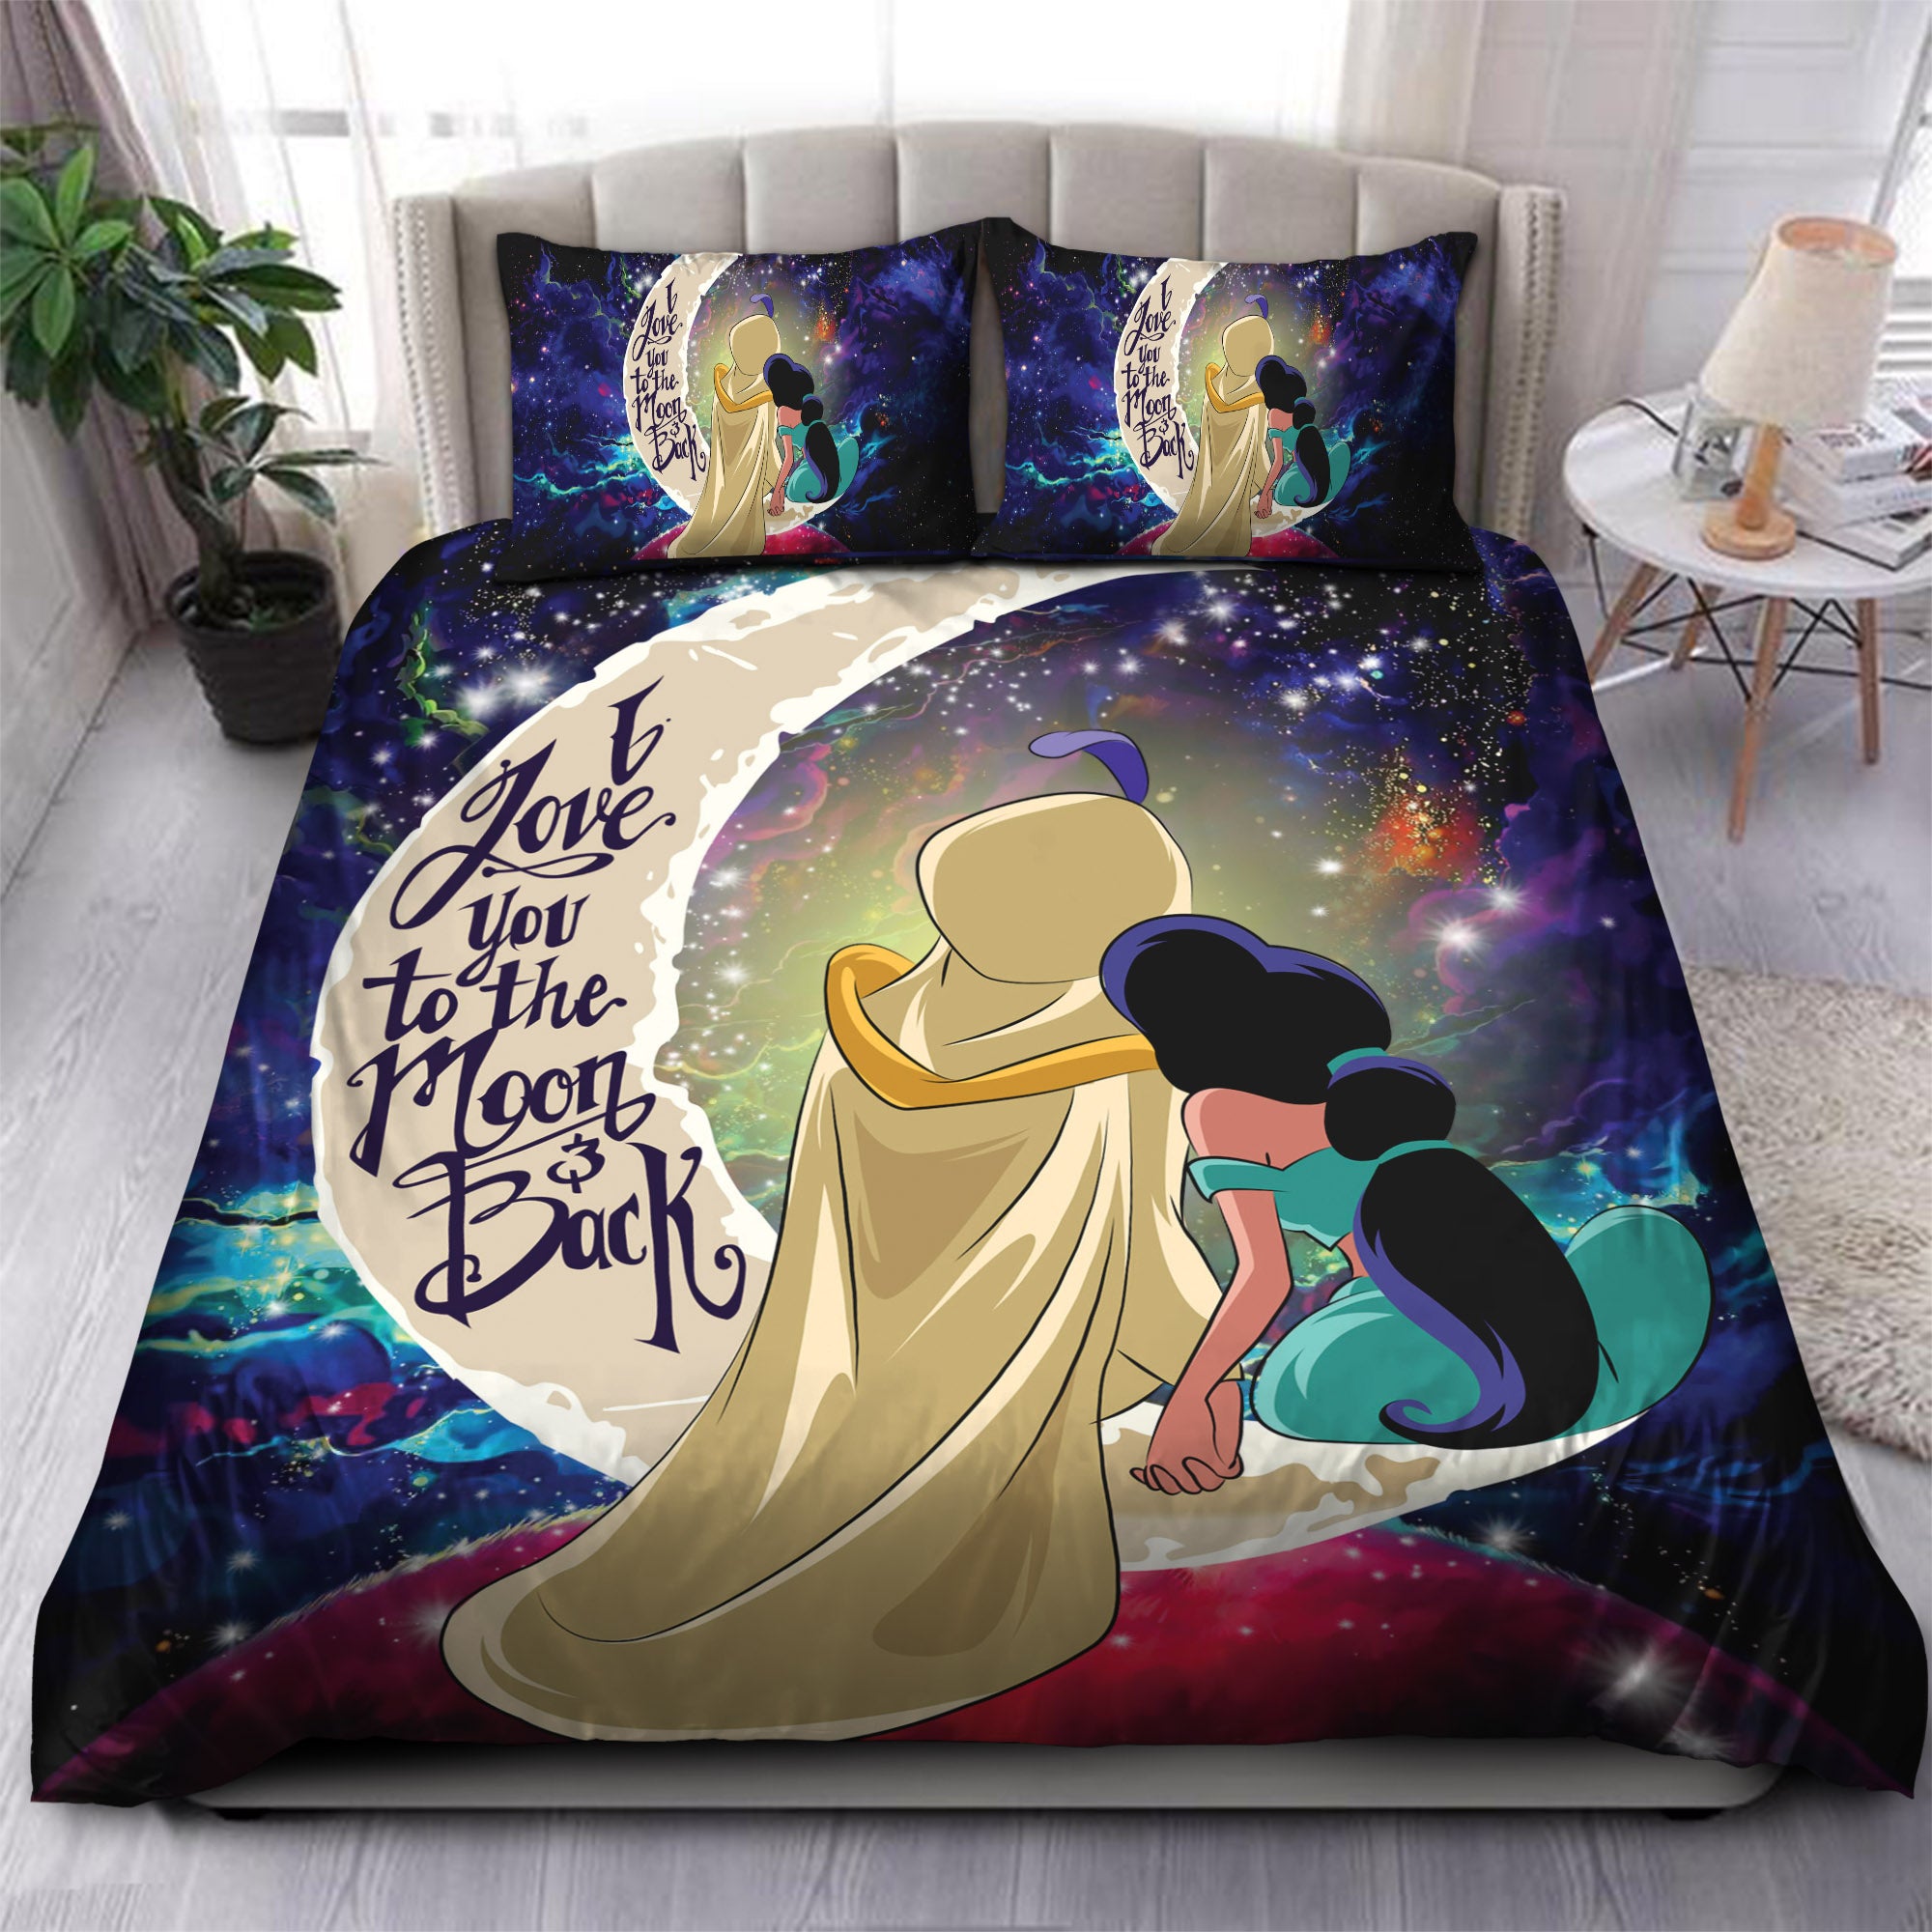 Aladin Couple Love You To The Moon Galaxy Bedding Set Duvet Cover And 2 Pillowcases